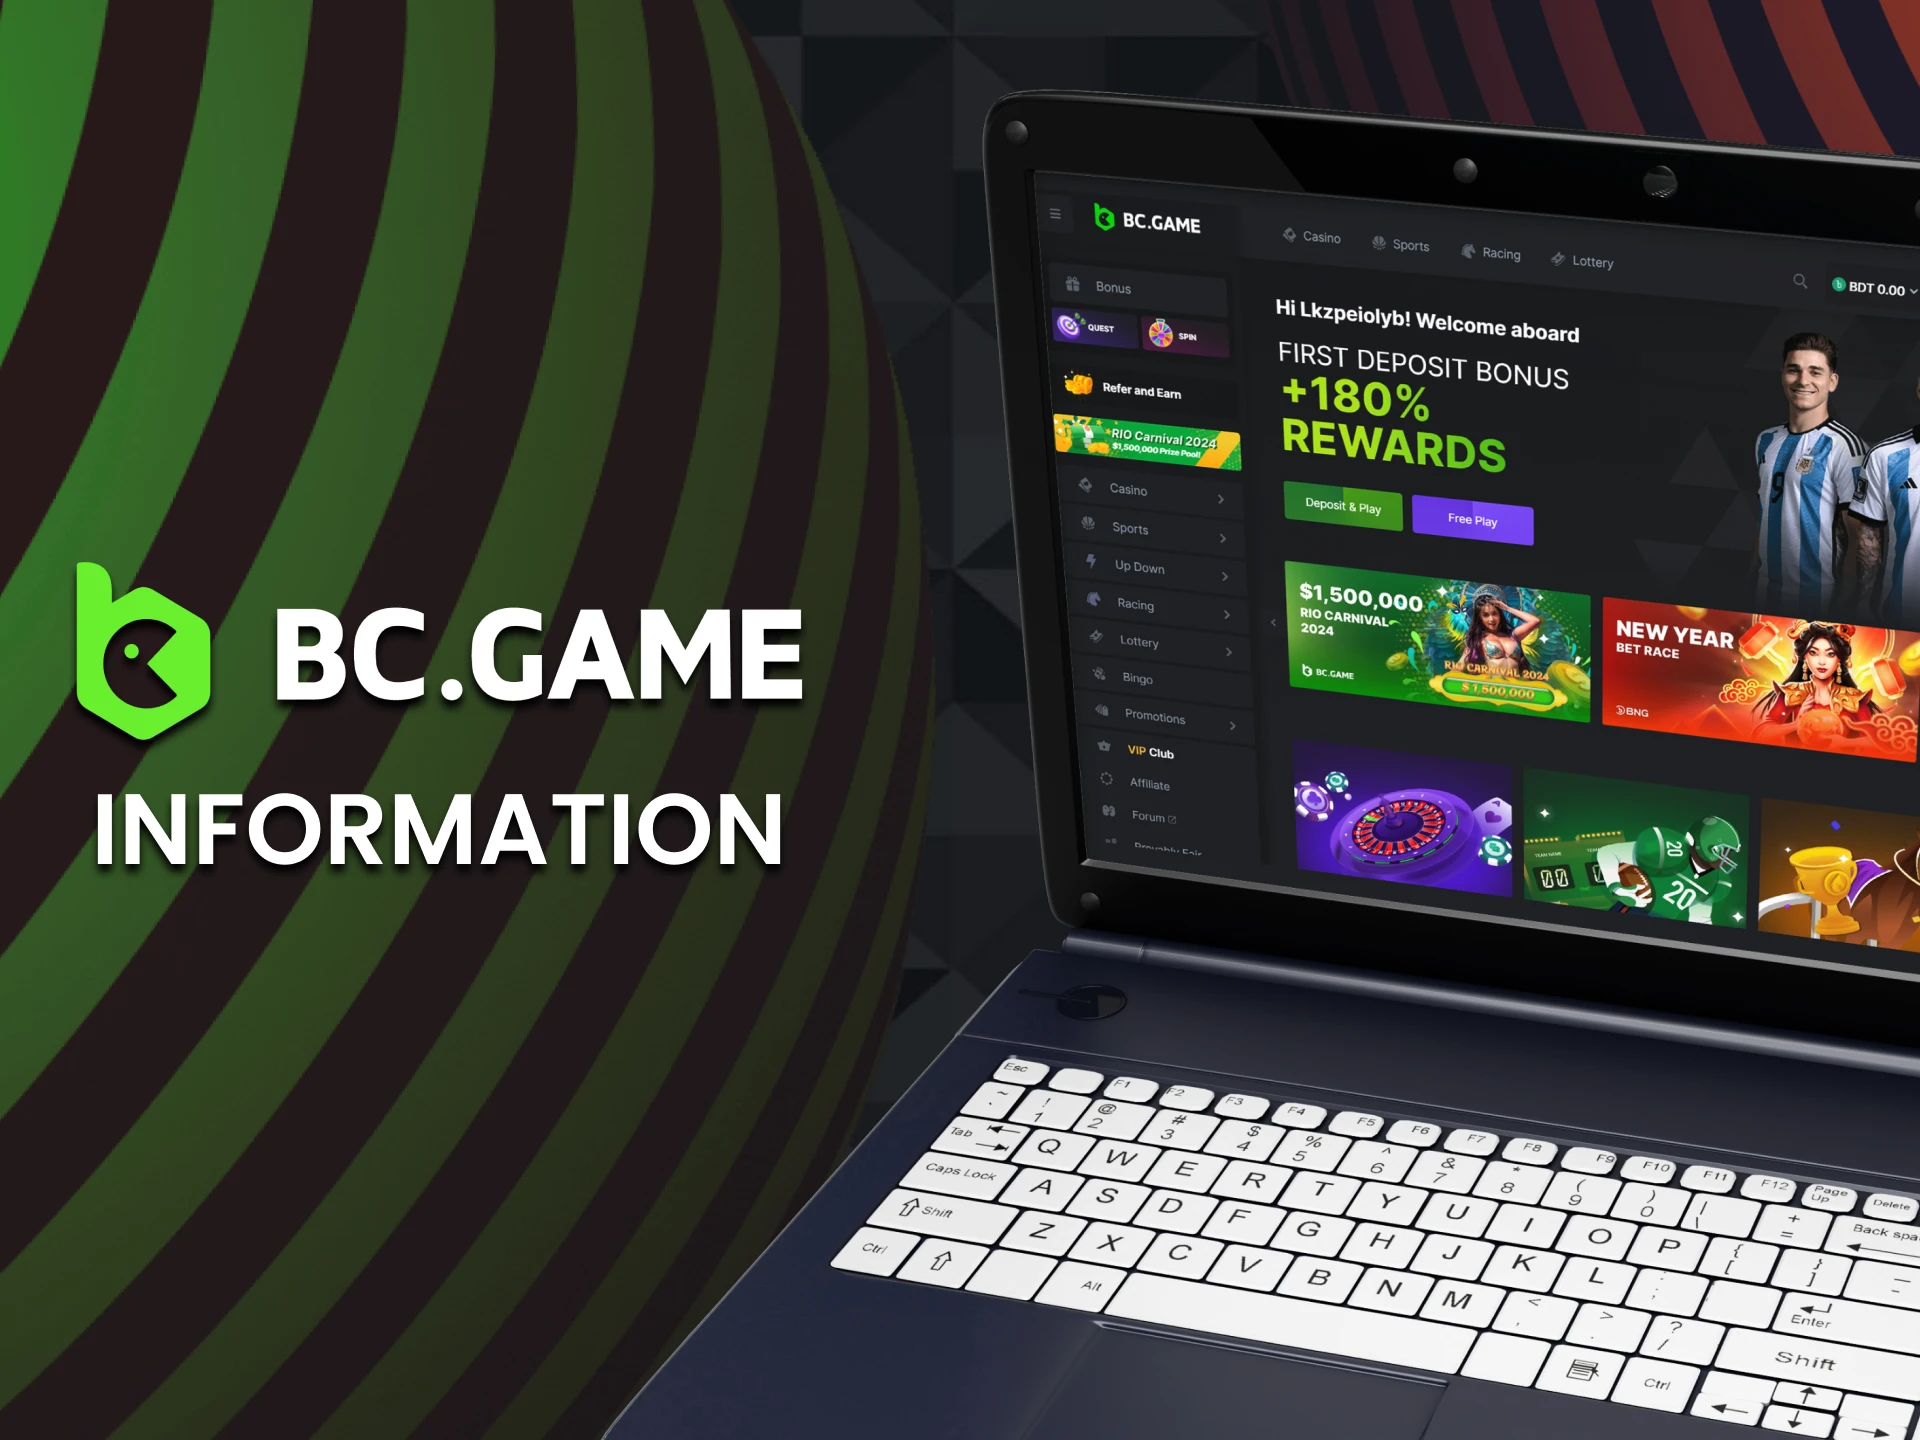 We will provide all the information about the BCGame website.